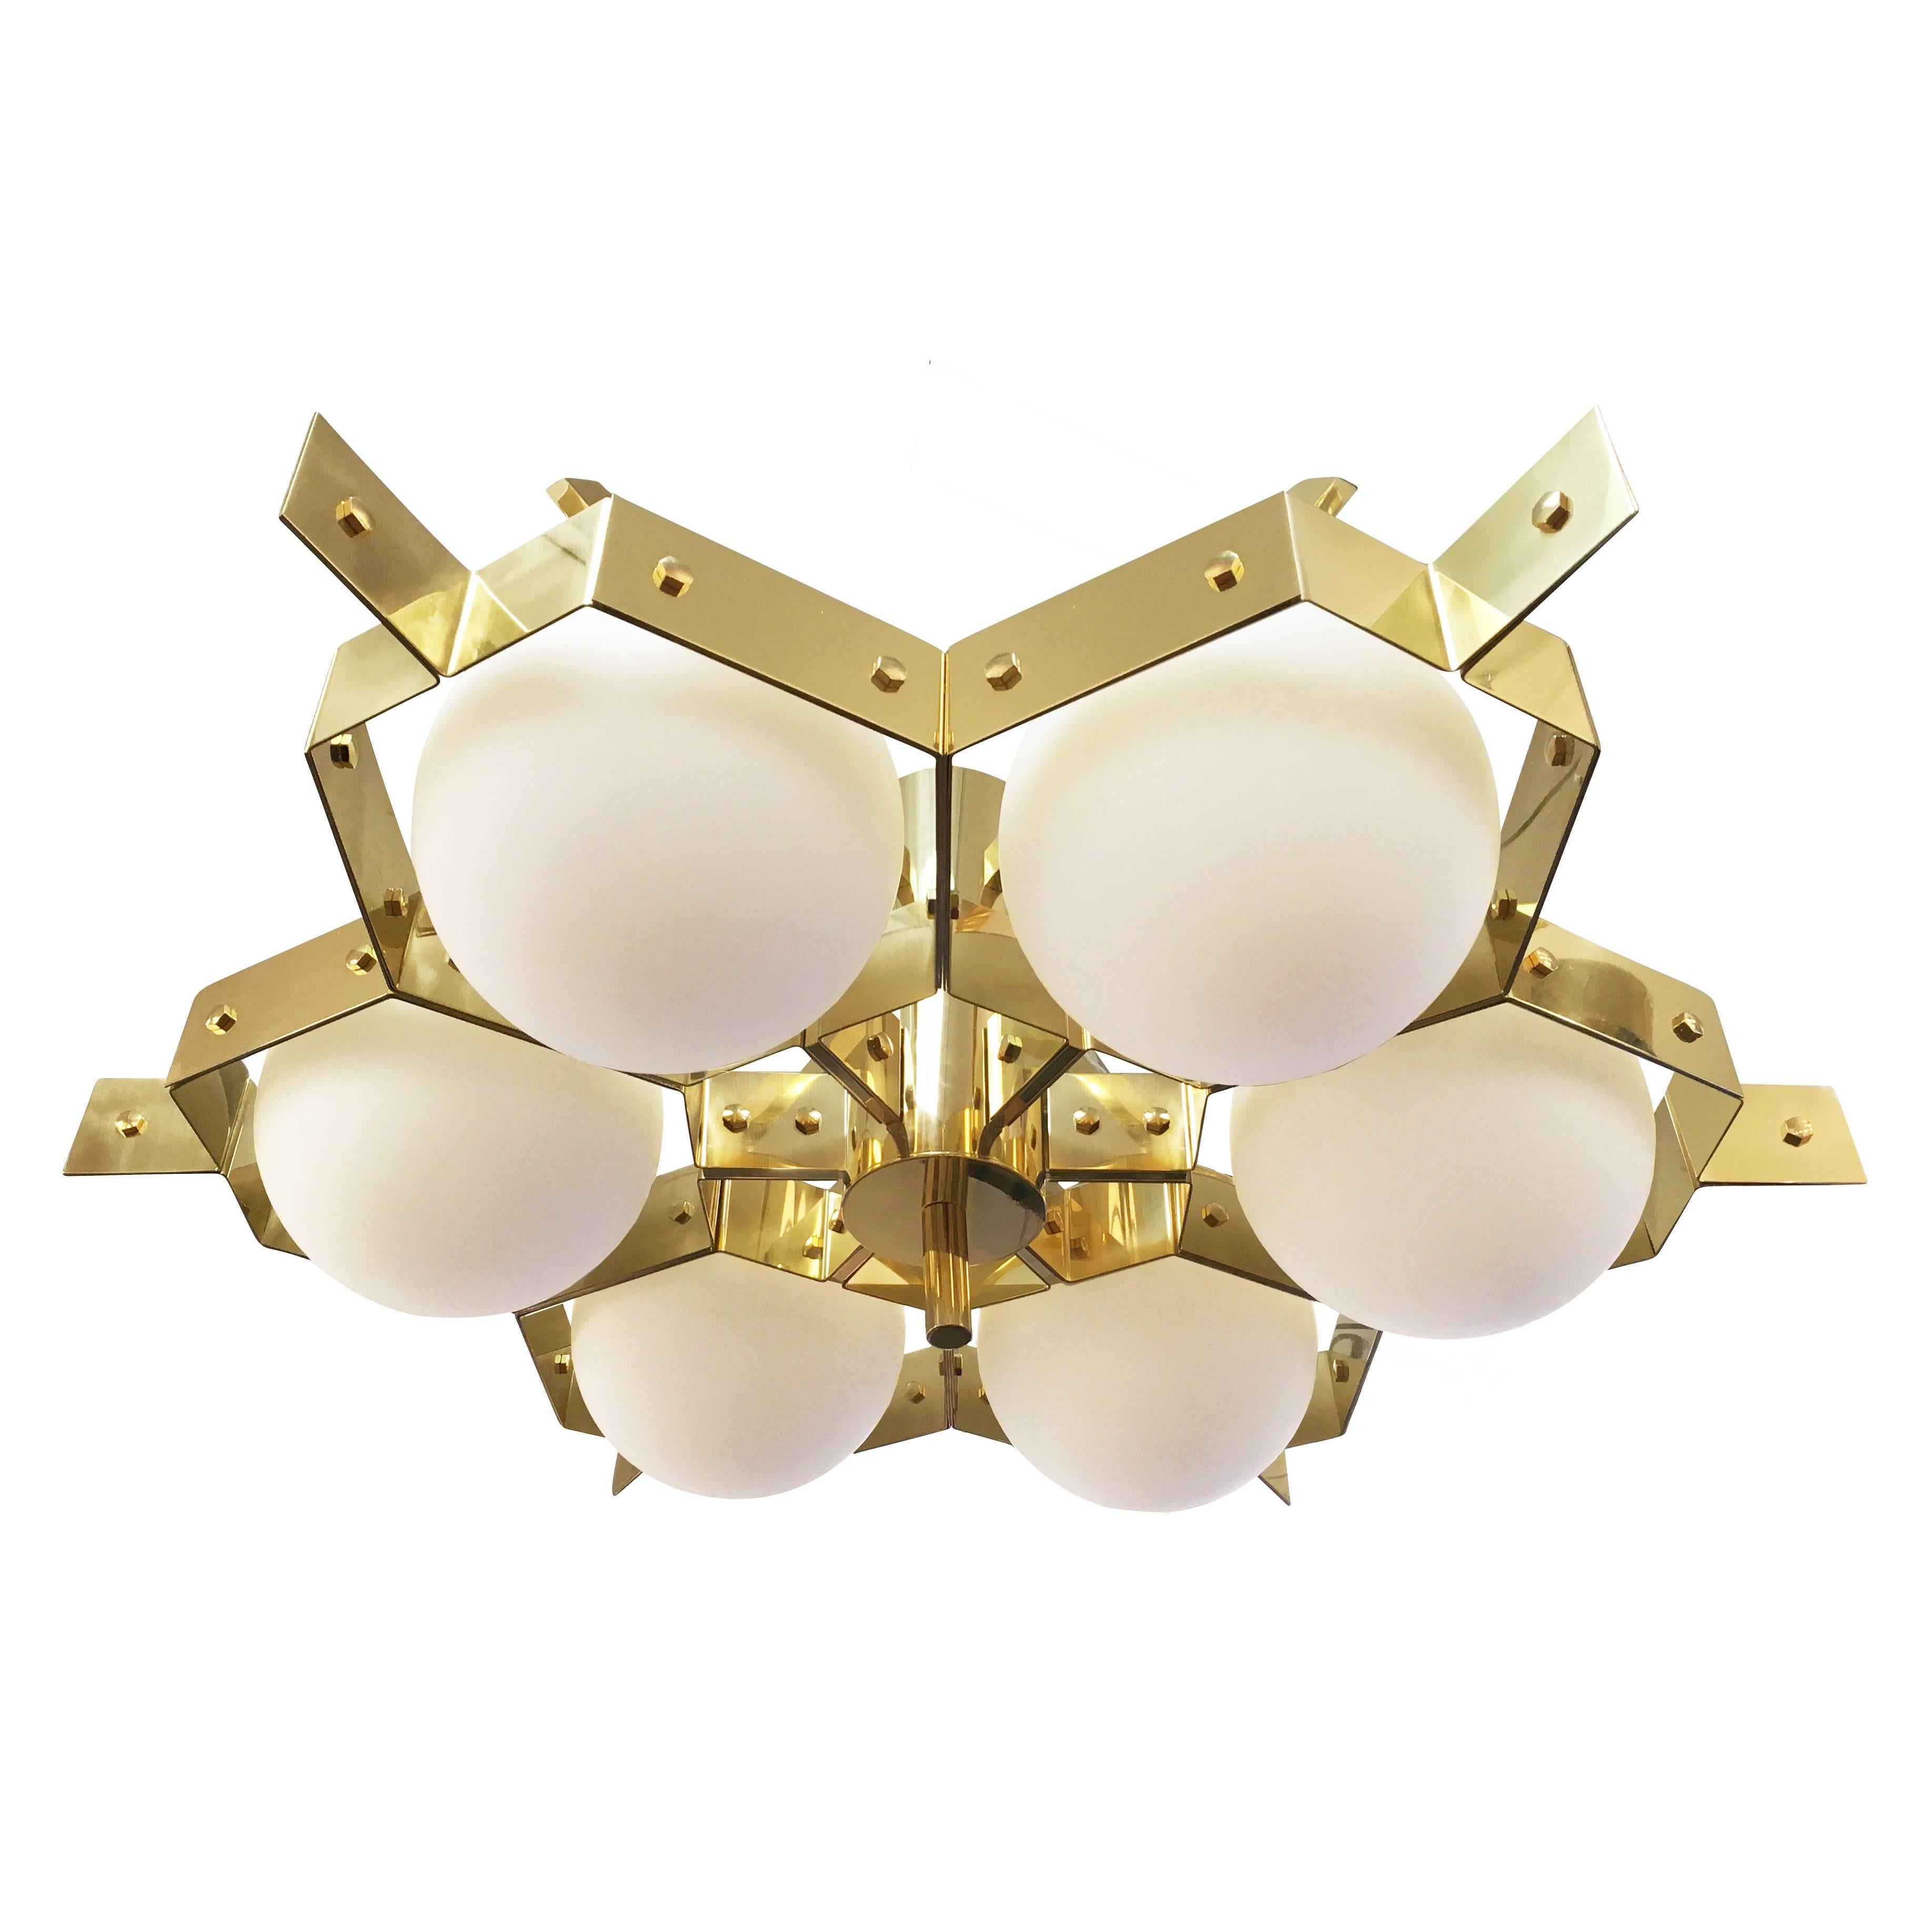 "Nido" Ceiling Light by Fedele Papagni for Gaspare Asaro